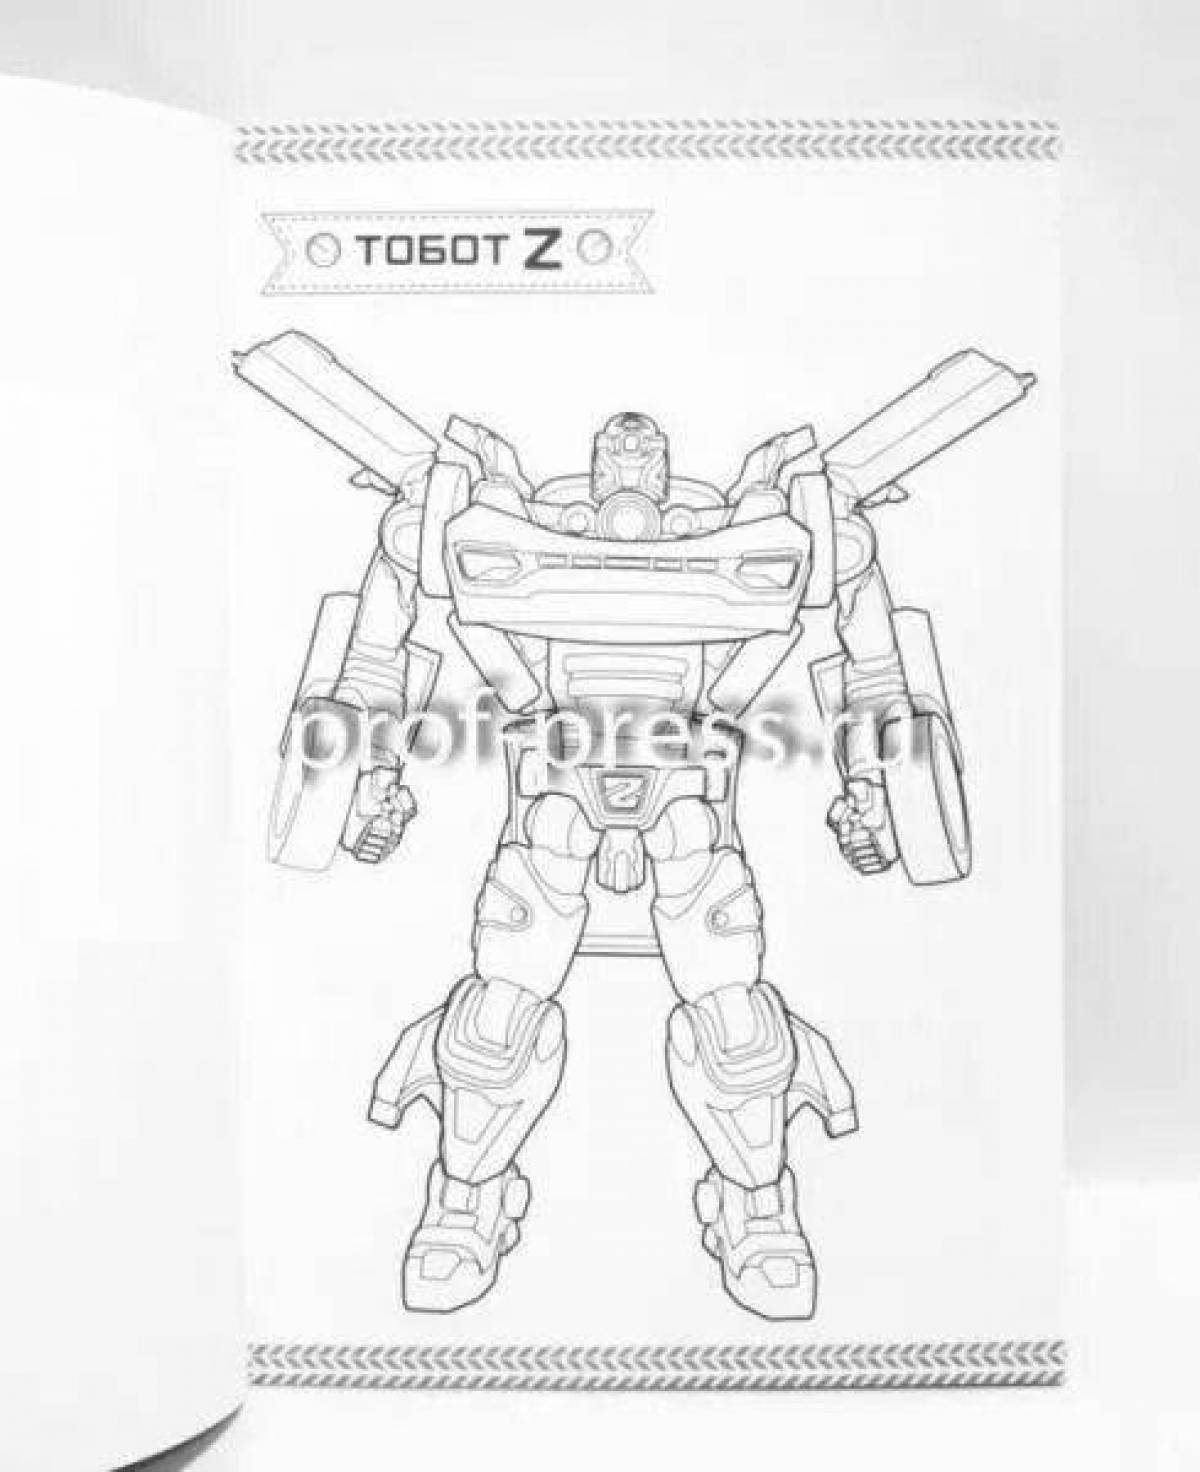 Coloring tobot z with imagination